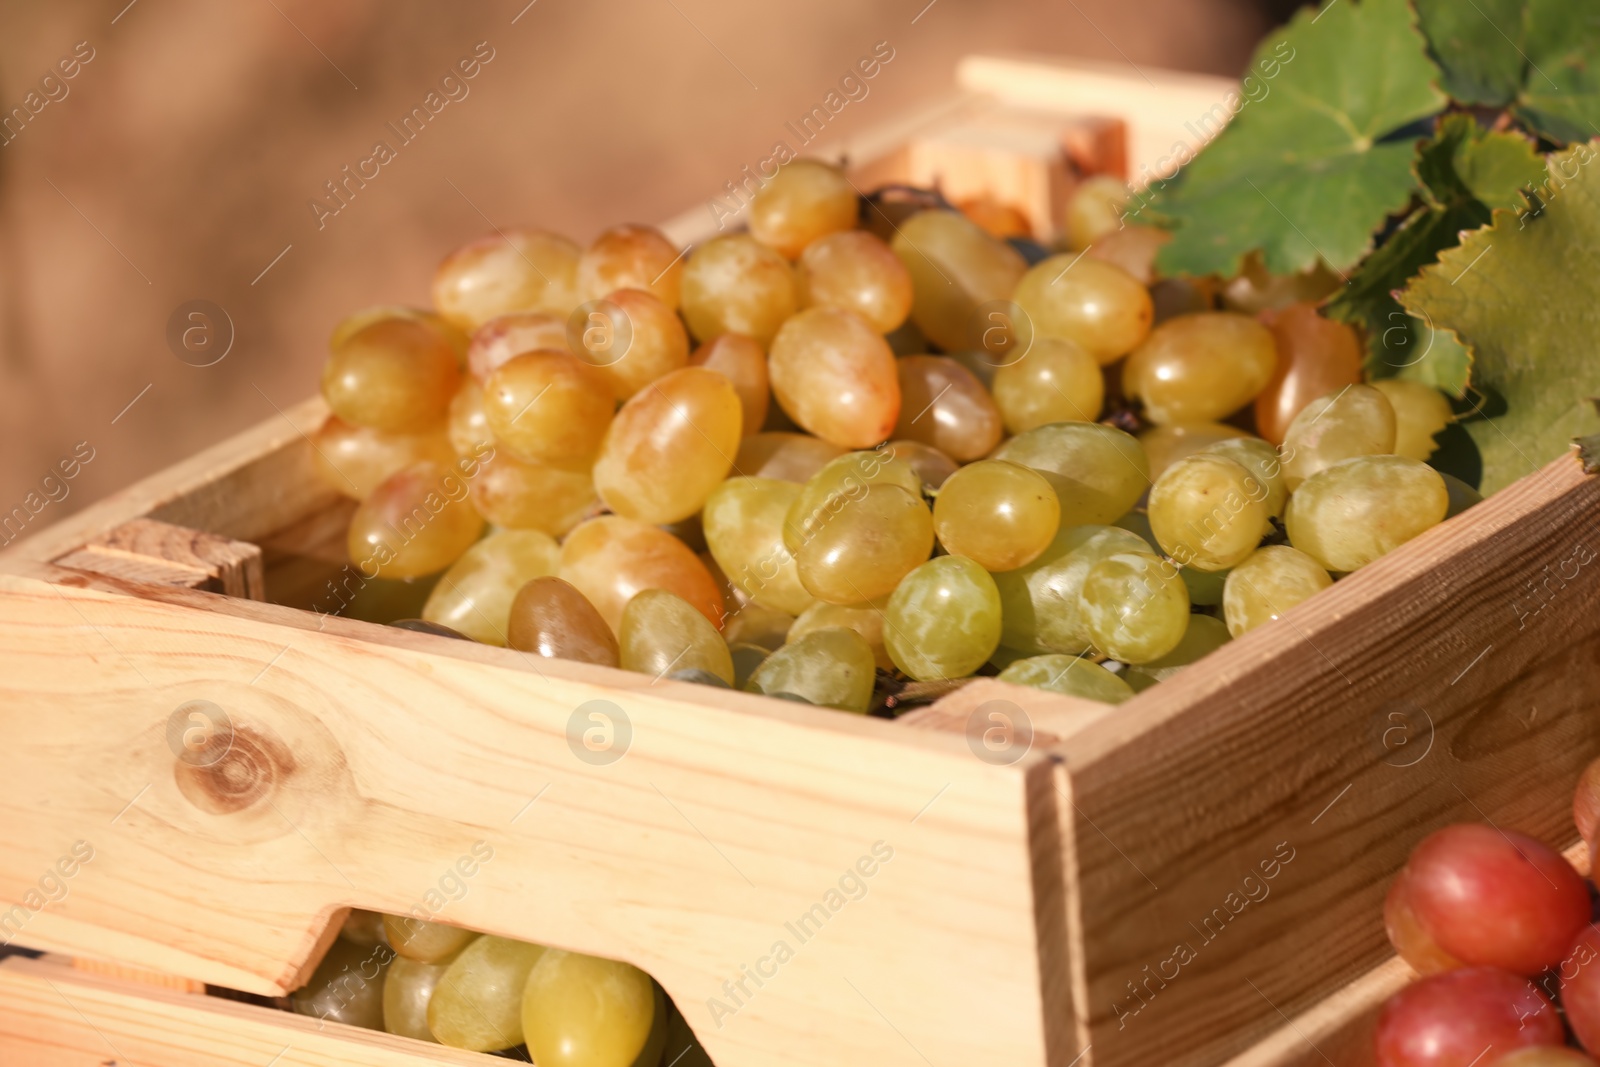 Photo of Fresh ripe juicy grapes in wooden crate against blurred background